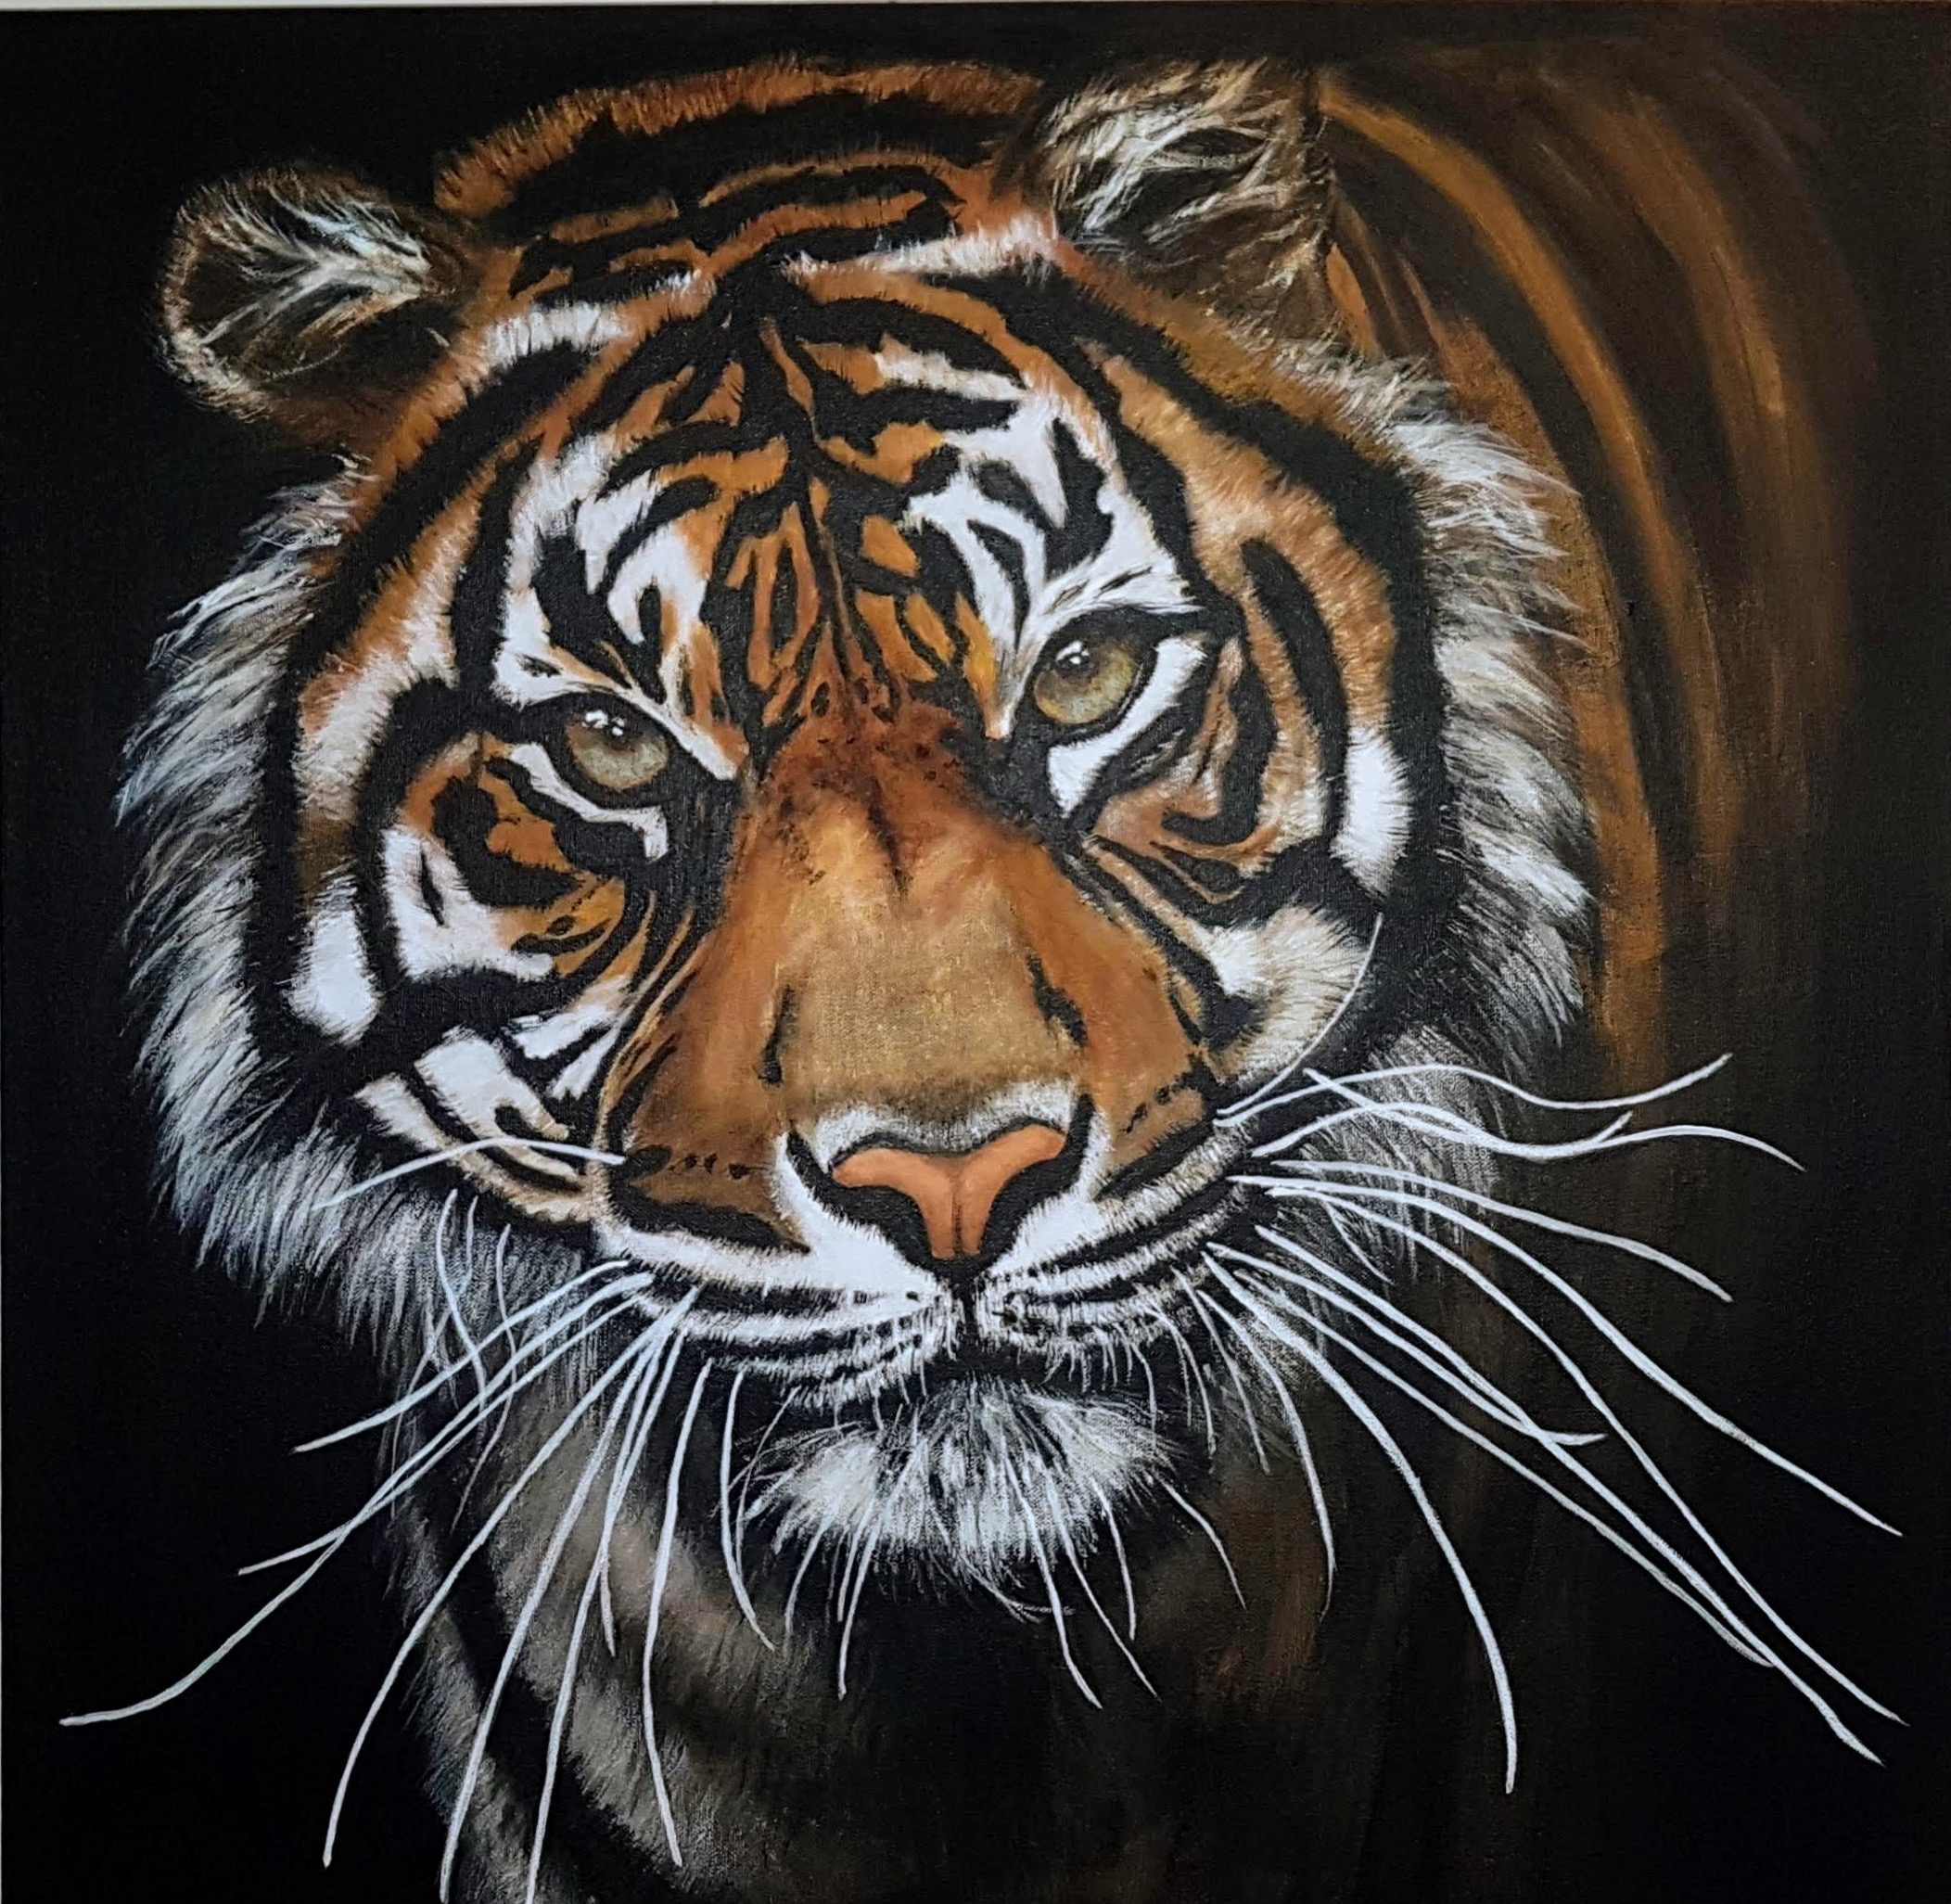 Painting of a tiger by Art Studio Florine